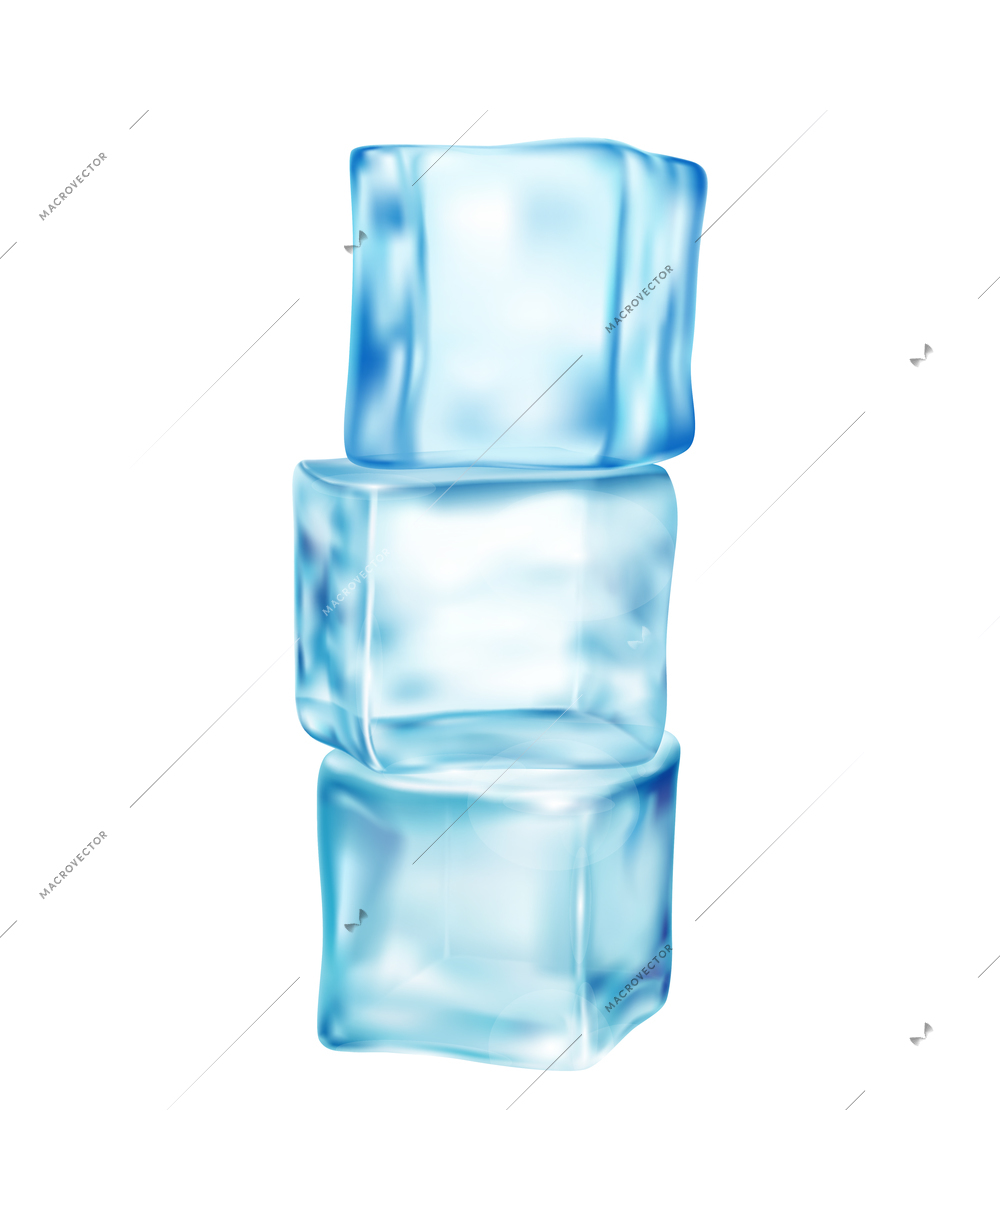 Realistic composition with images of ice cubes on blank background vector illustration